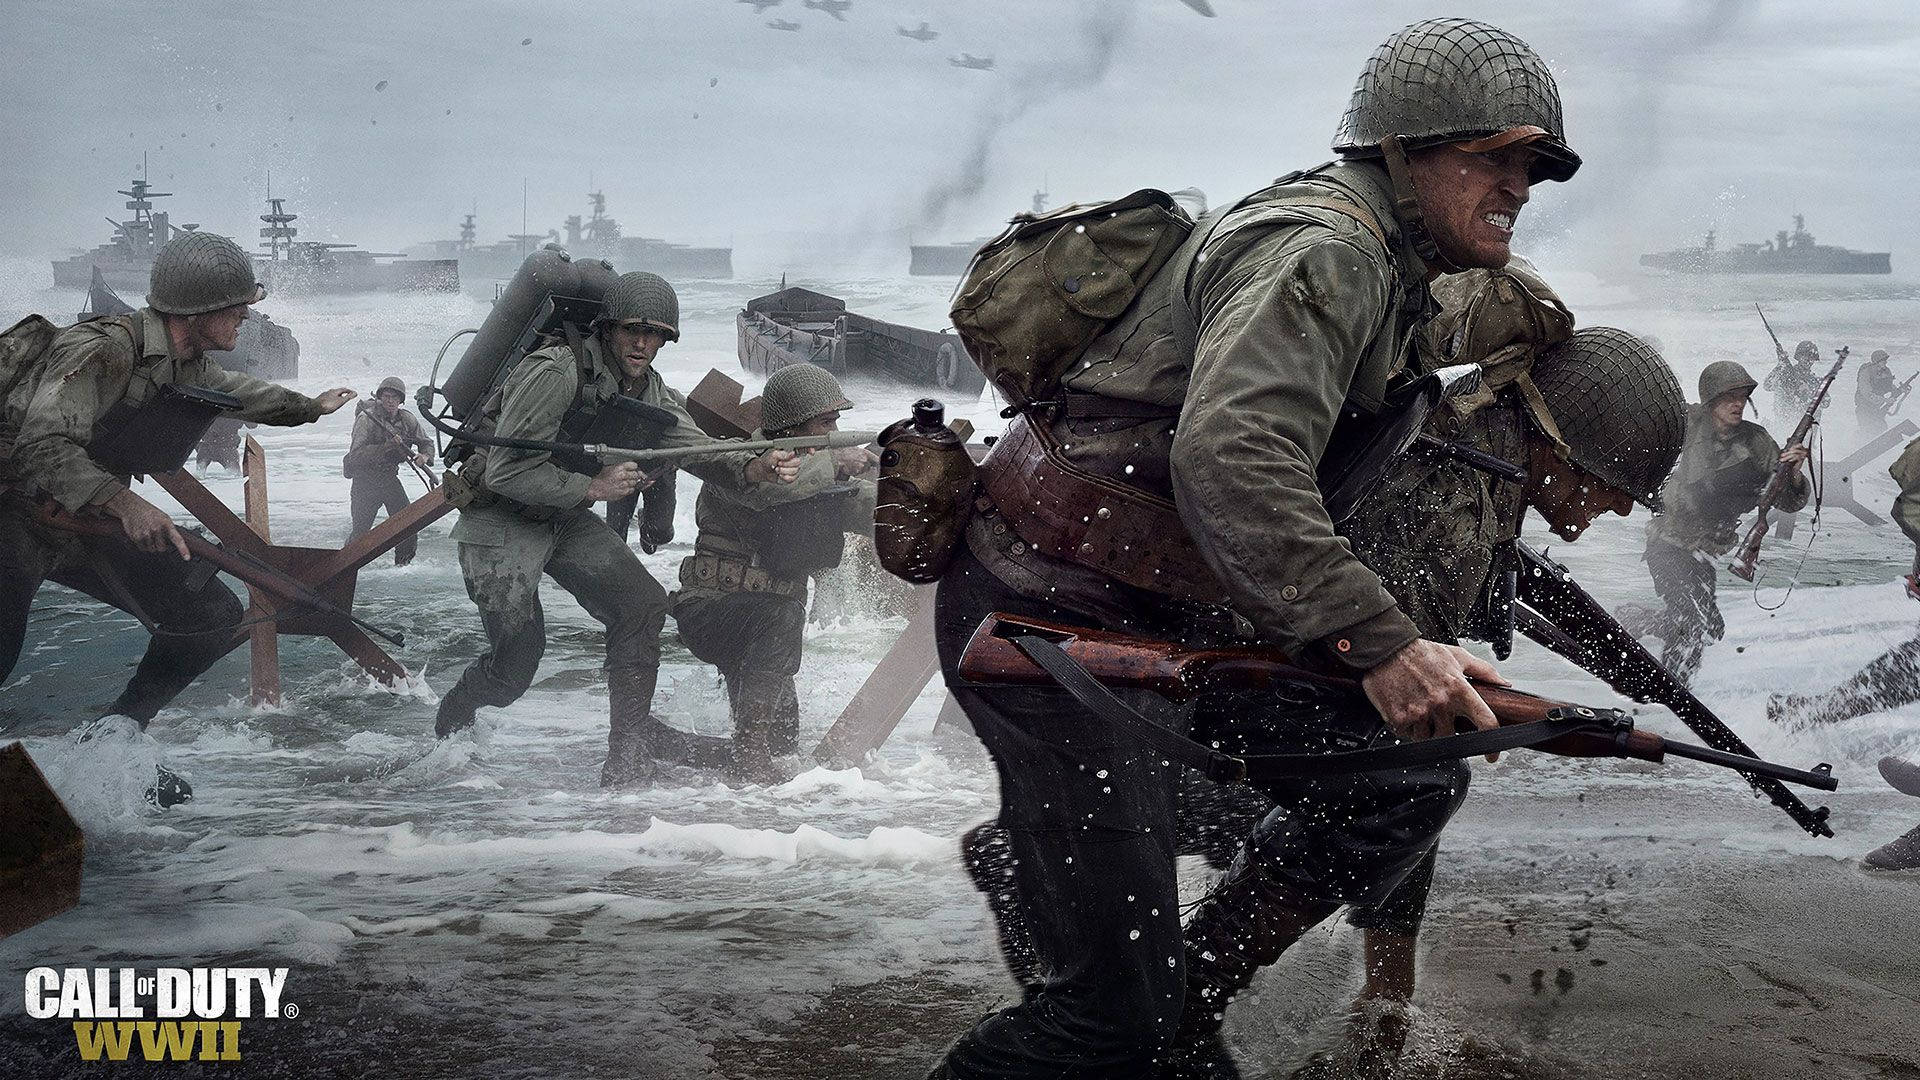 Call Of Duty Wwii Digital Poster Wallpaper